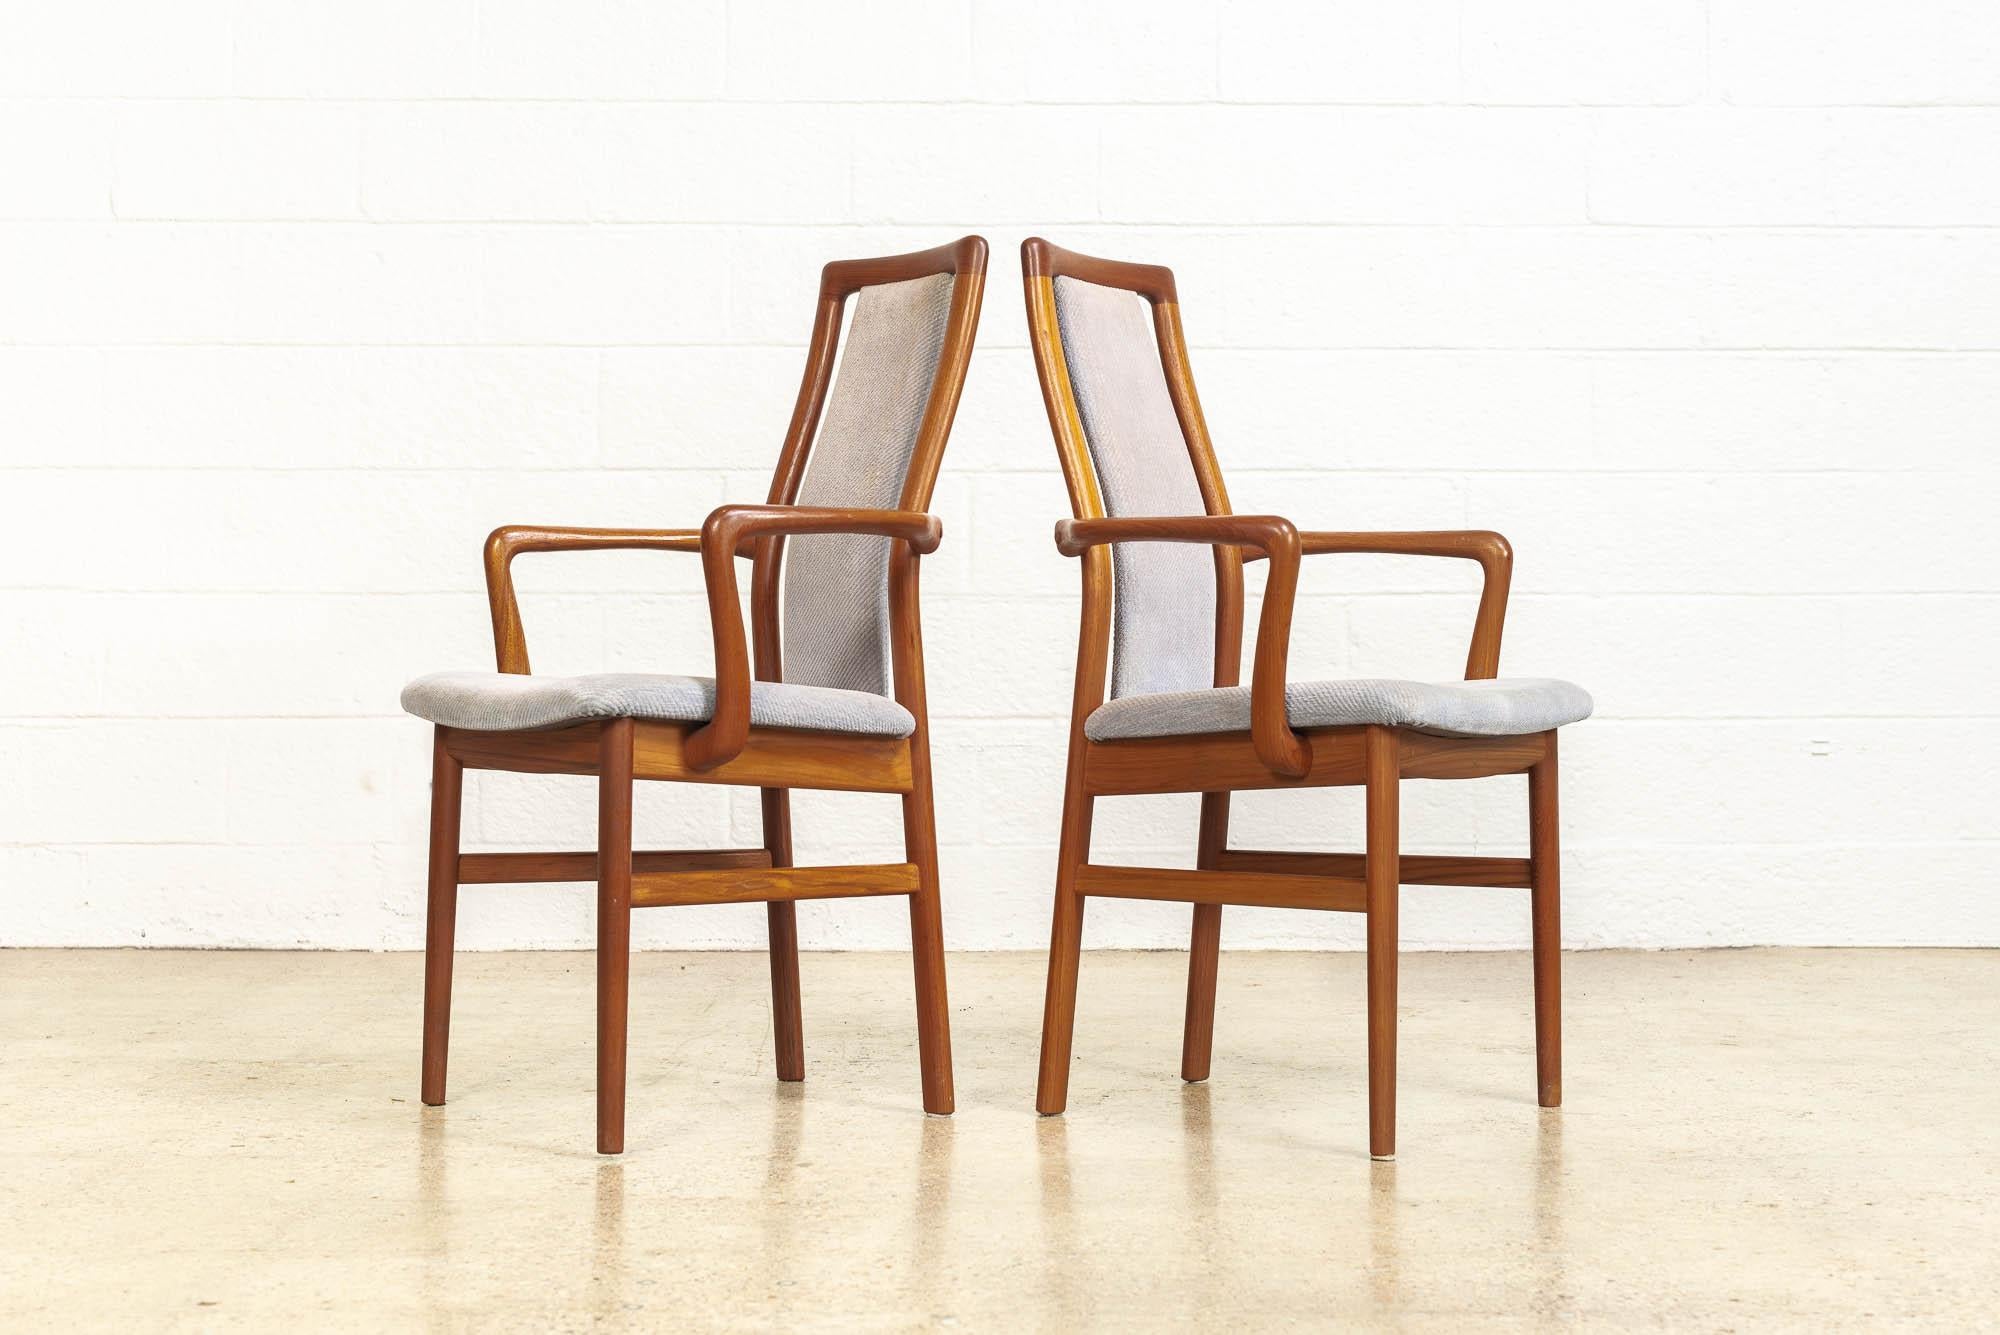 American Mid-Century Danish Modern Teak Wood Upholstered Dining Chairs, Set of 6 For Sale